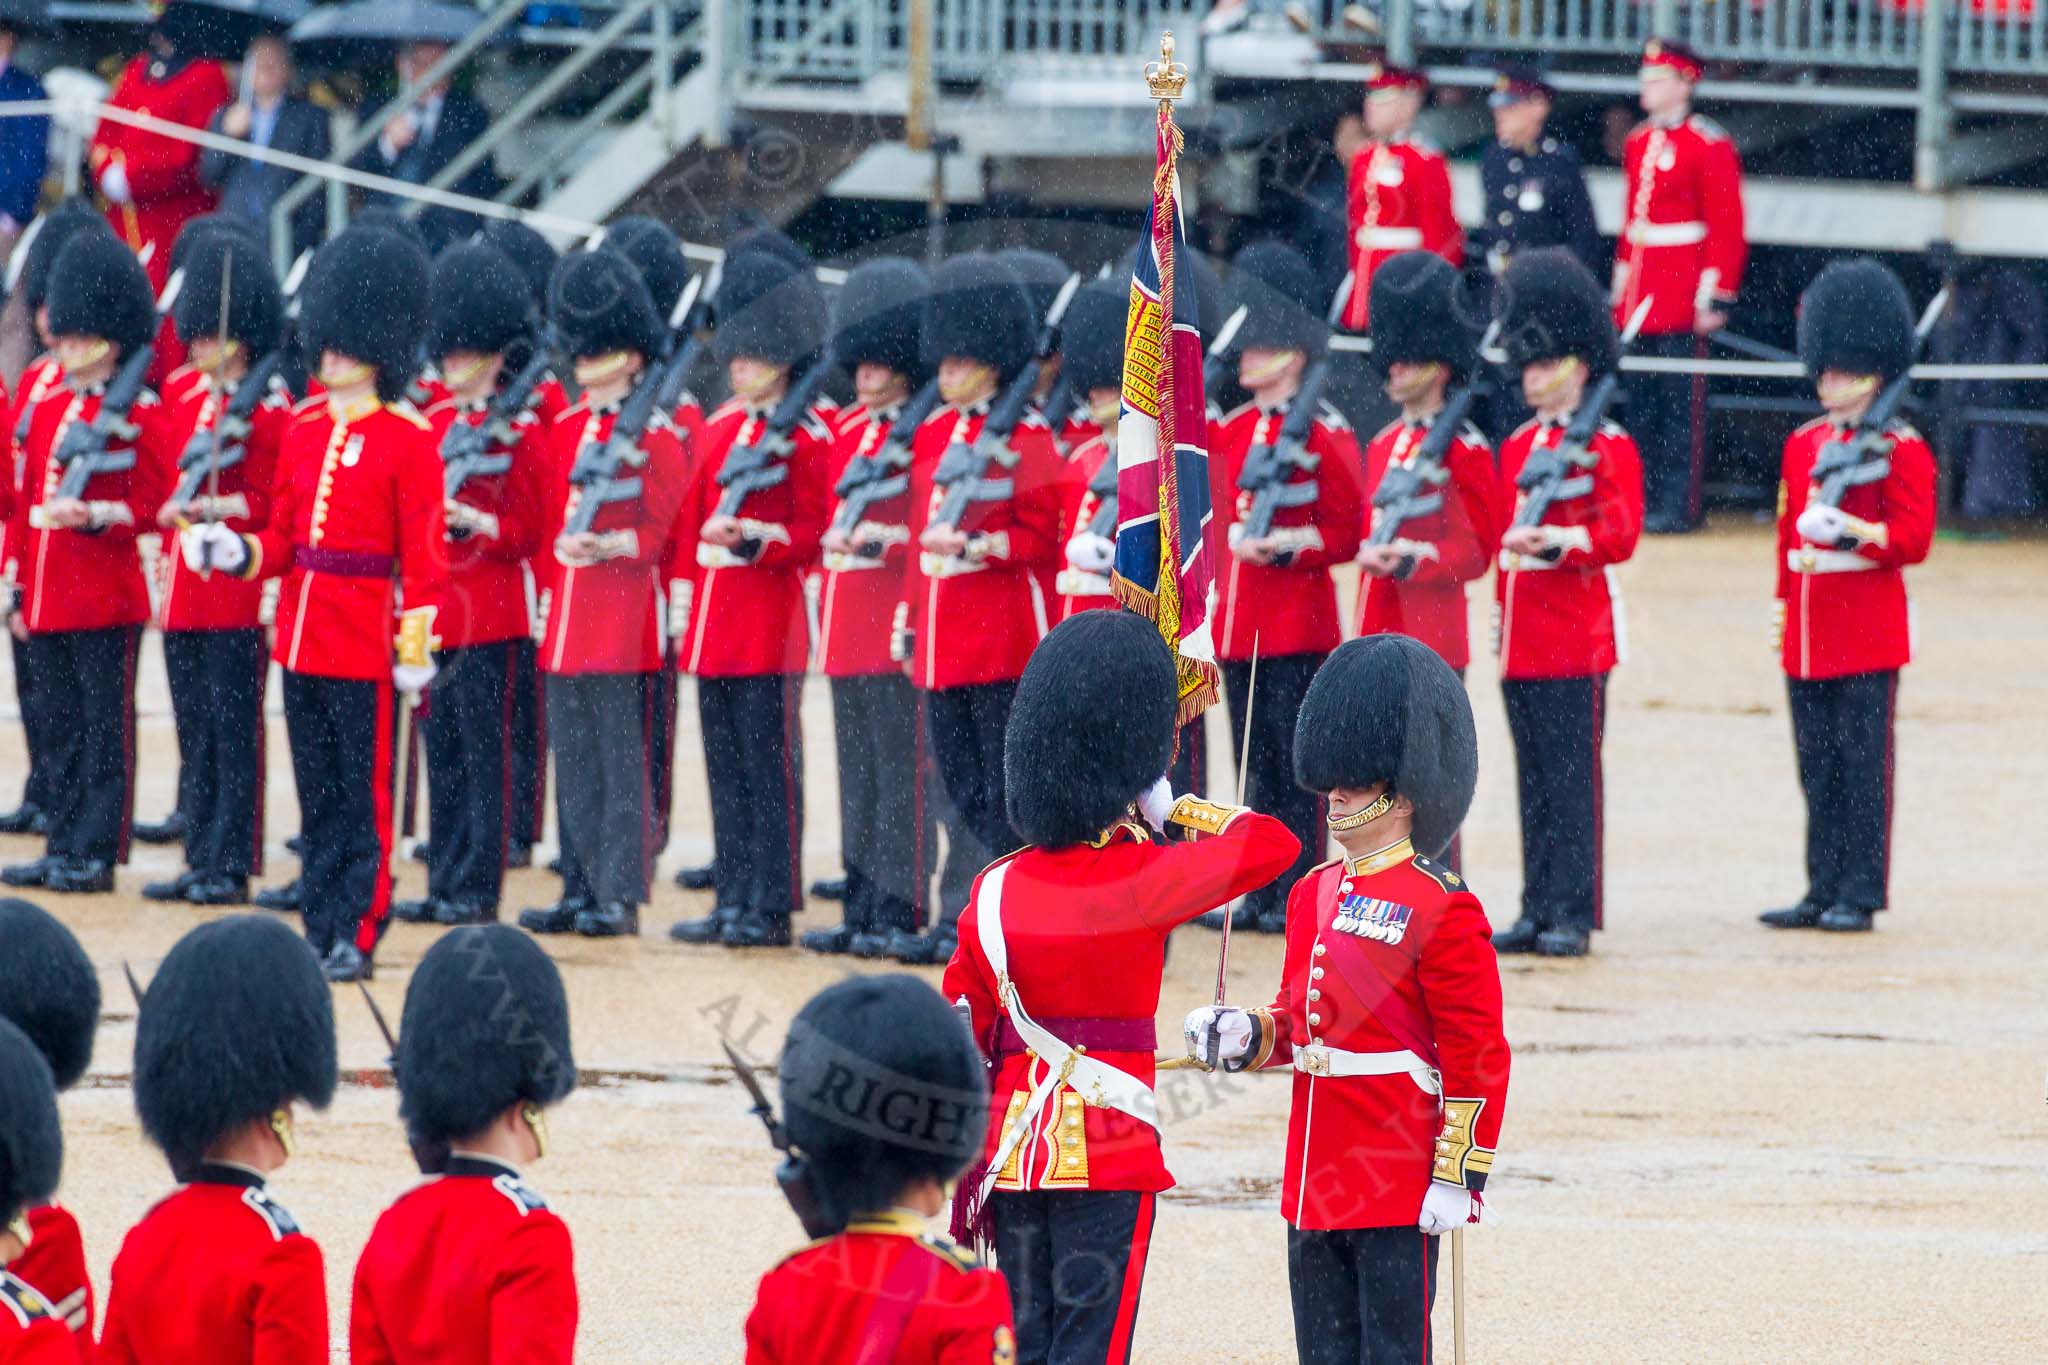 The Colonel's Review 2014.
Horse Guards Parade, Westminster,
London,

United Kingdom,
on 07 June 2014 at 11:19, image #399